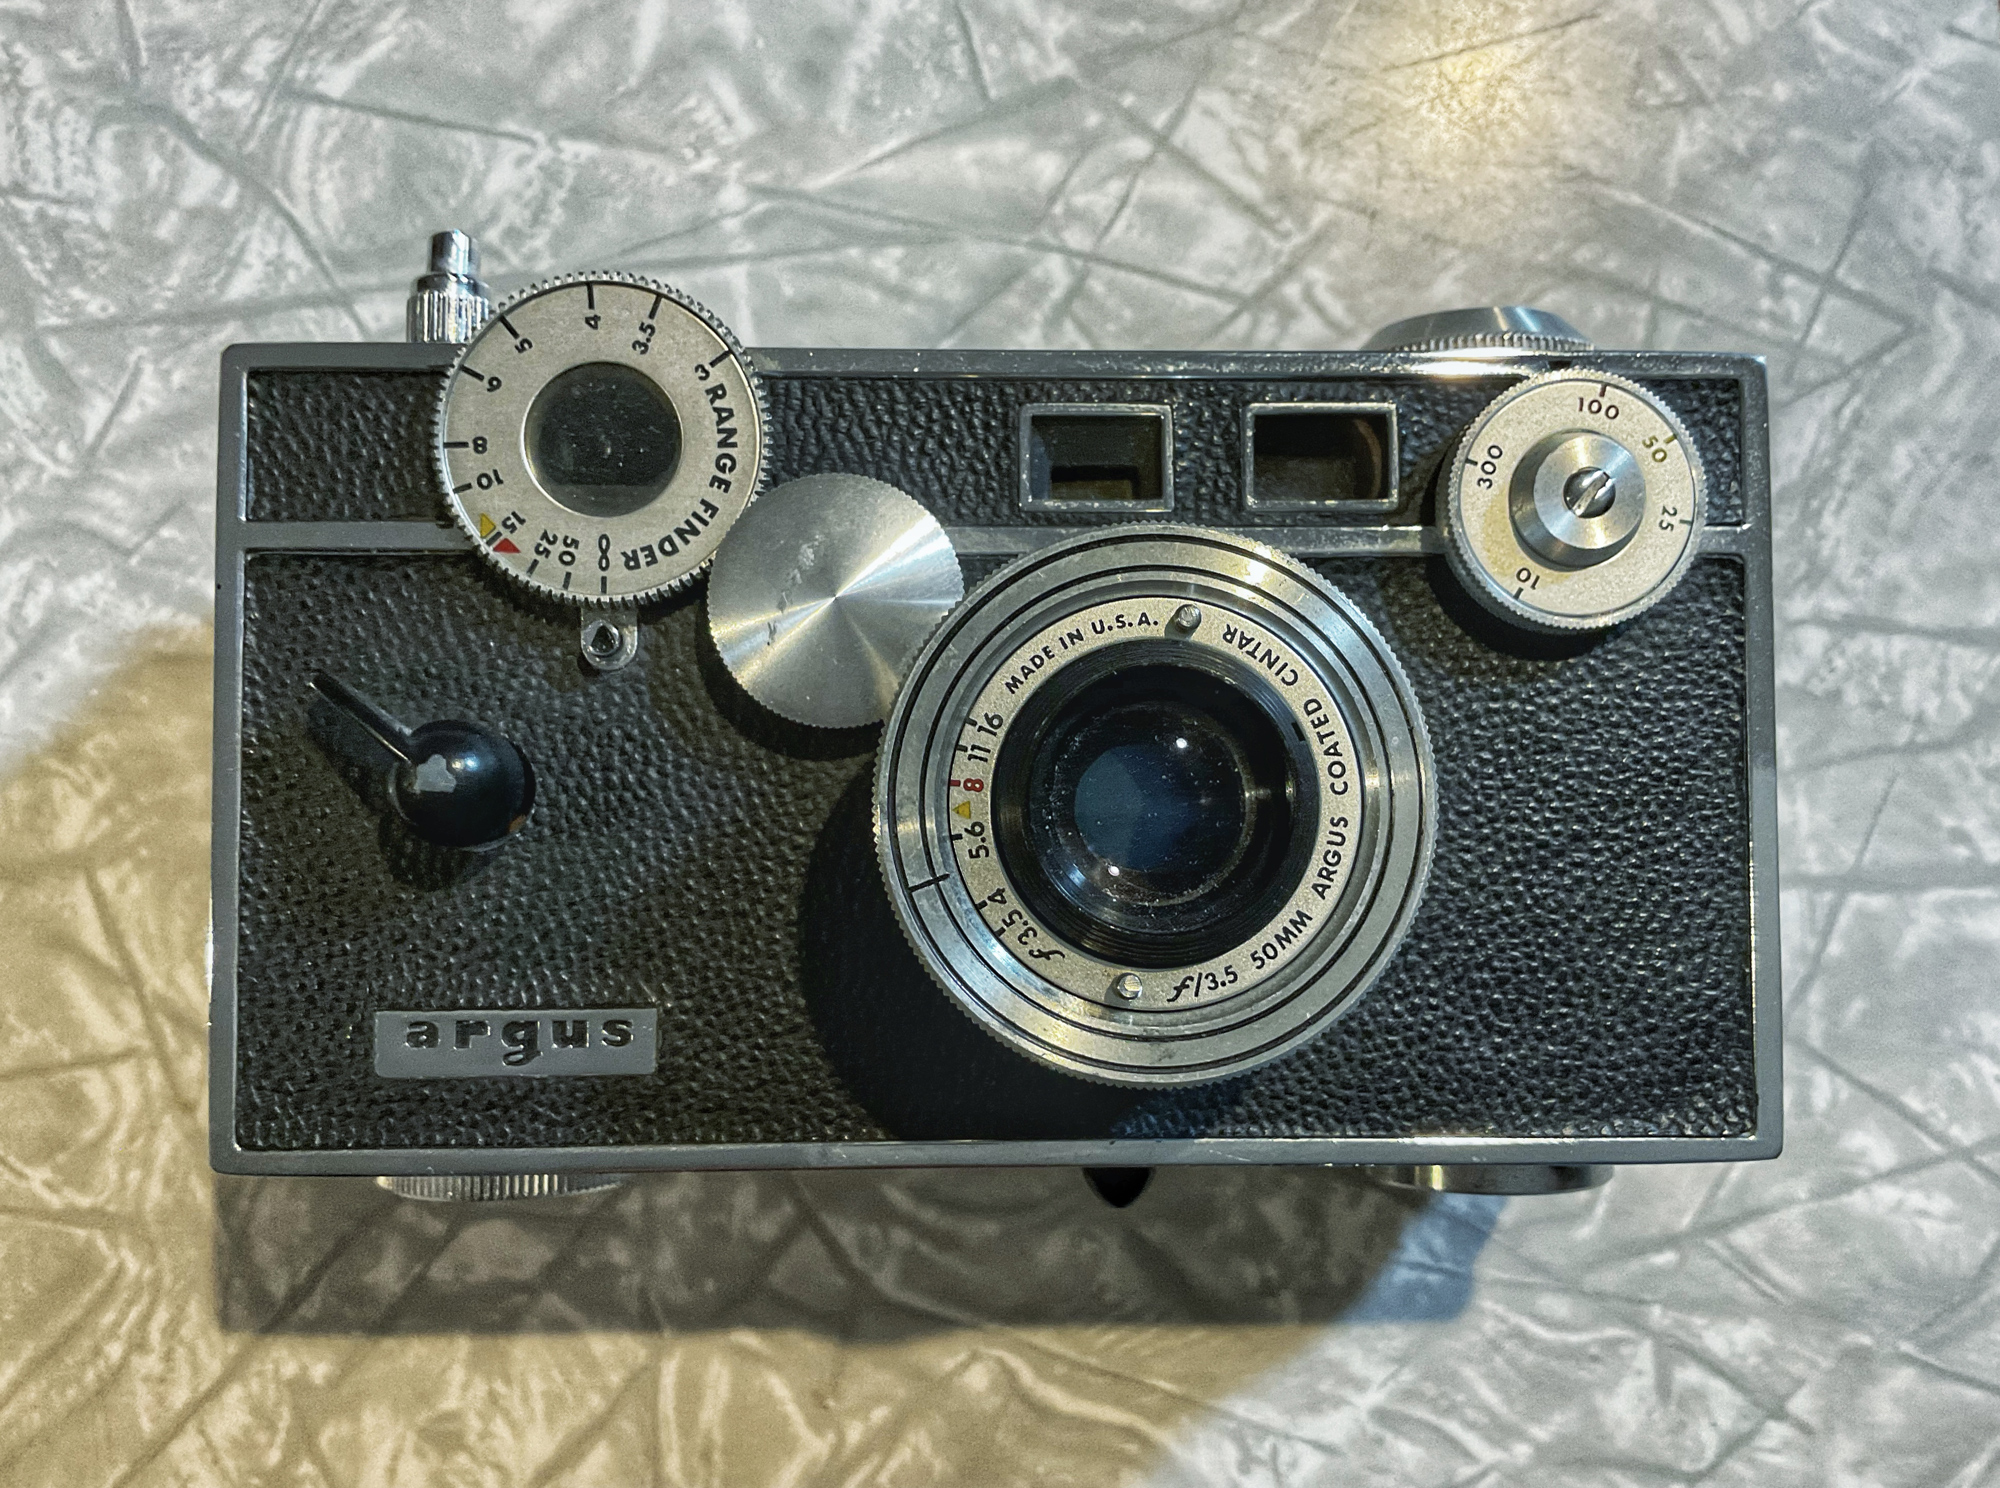 My first camera ever, The Argus C3